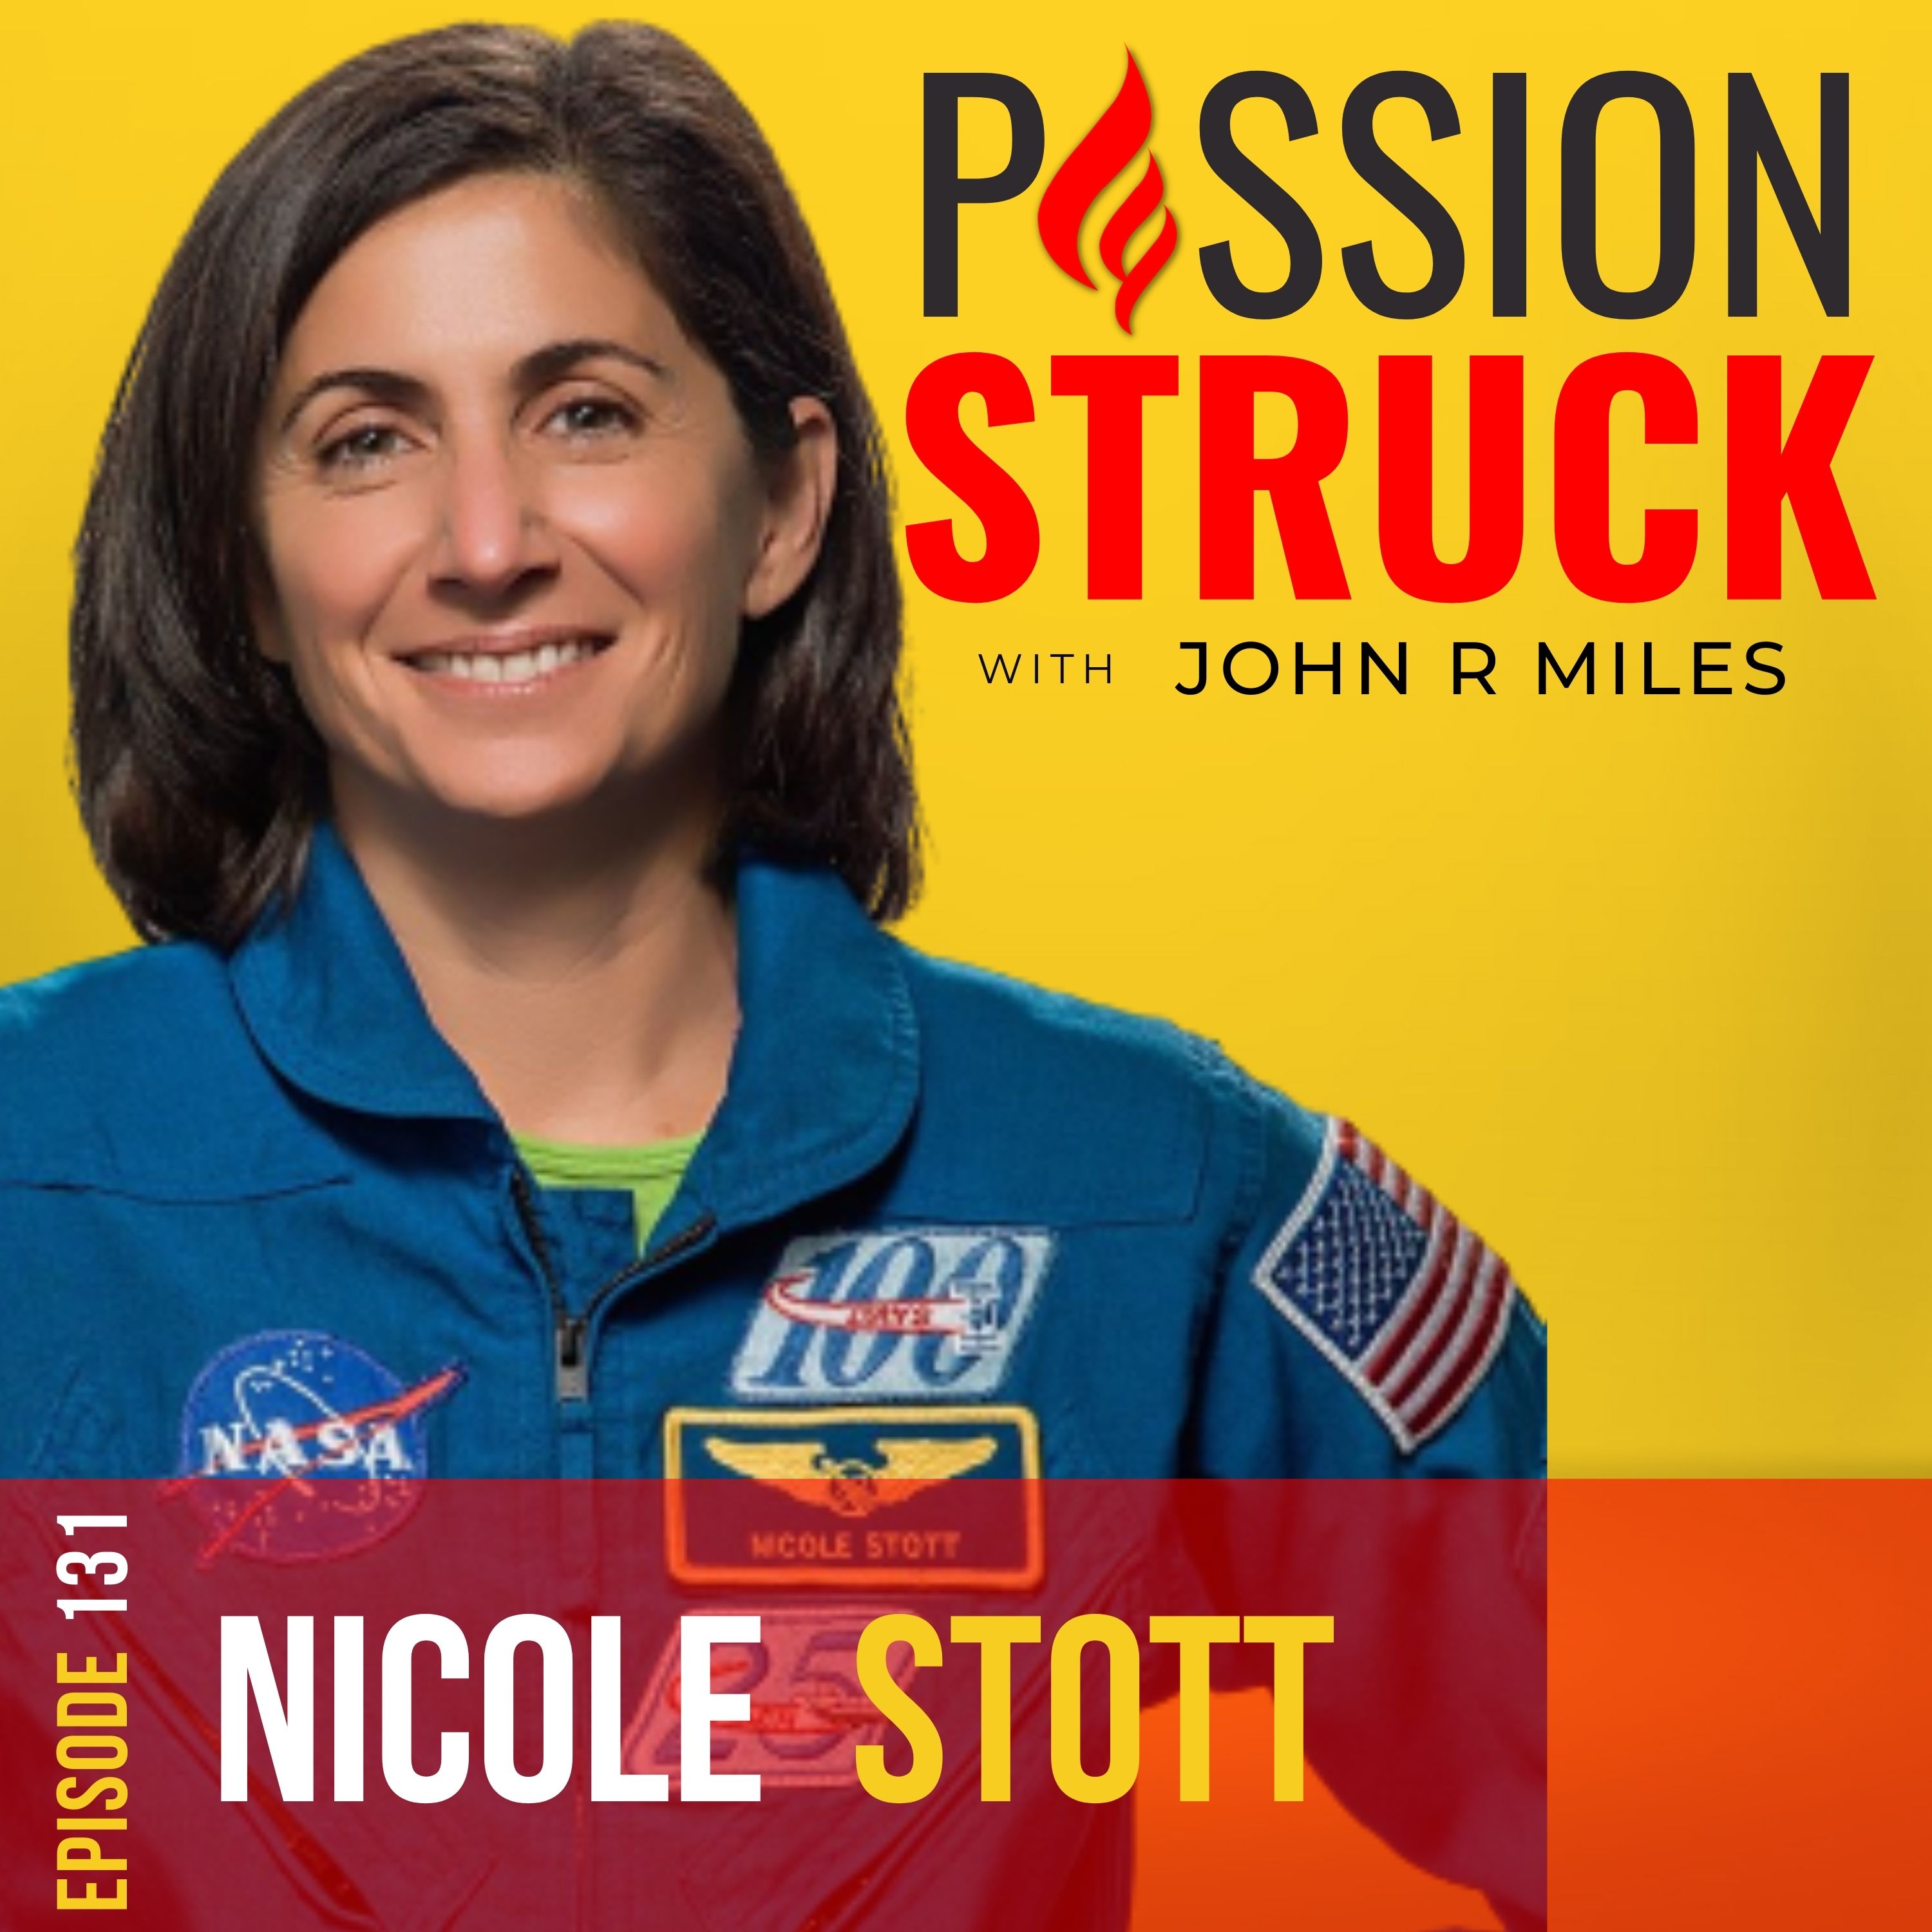 Passion Struck with John R. Miles album cover episode 131 with Astronaut Nicole Stott